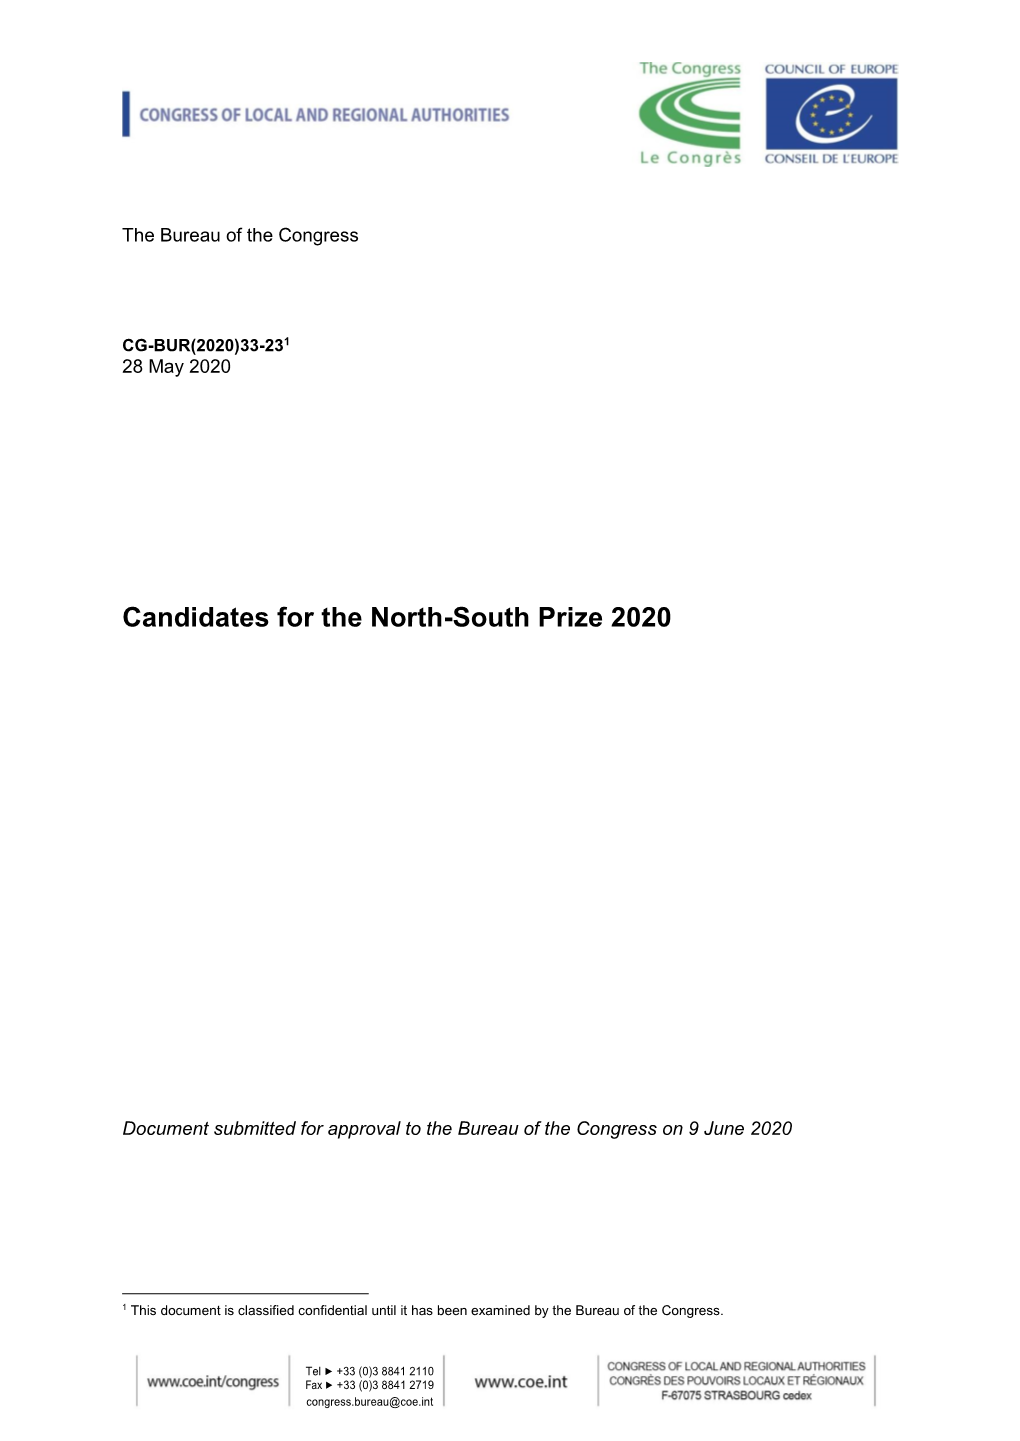 Candidates for the North-South Prize 2020